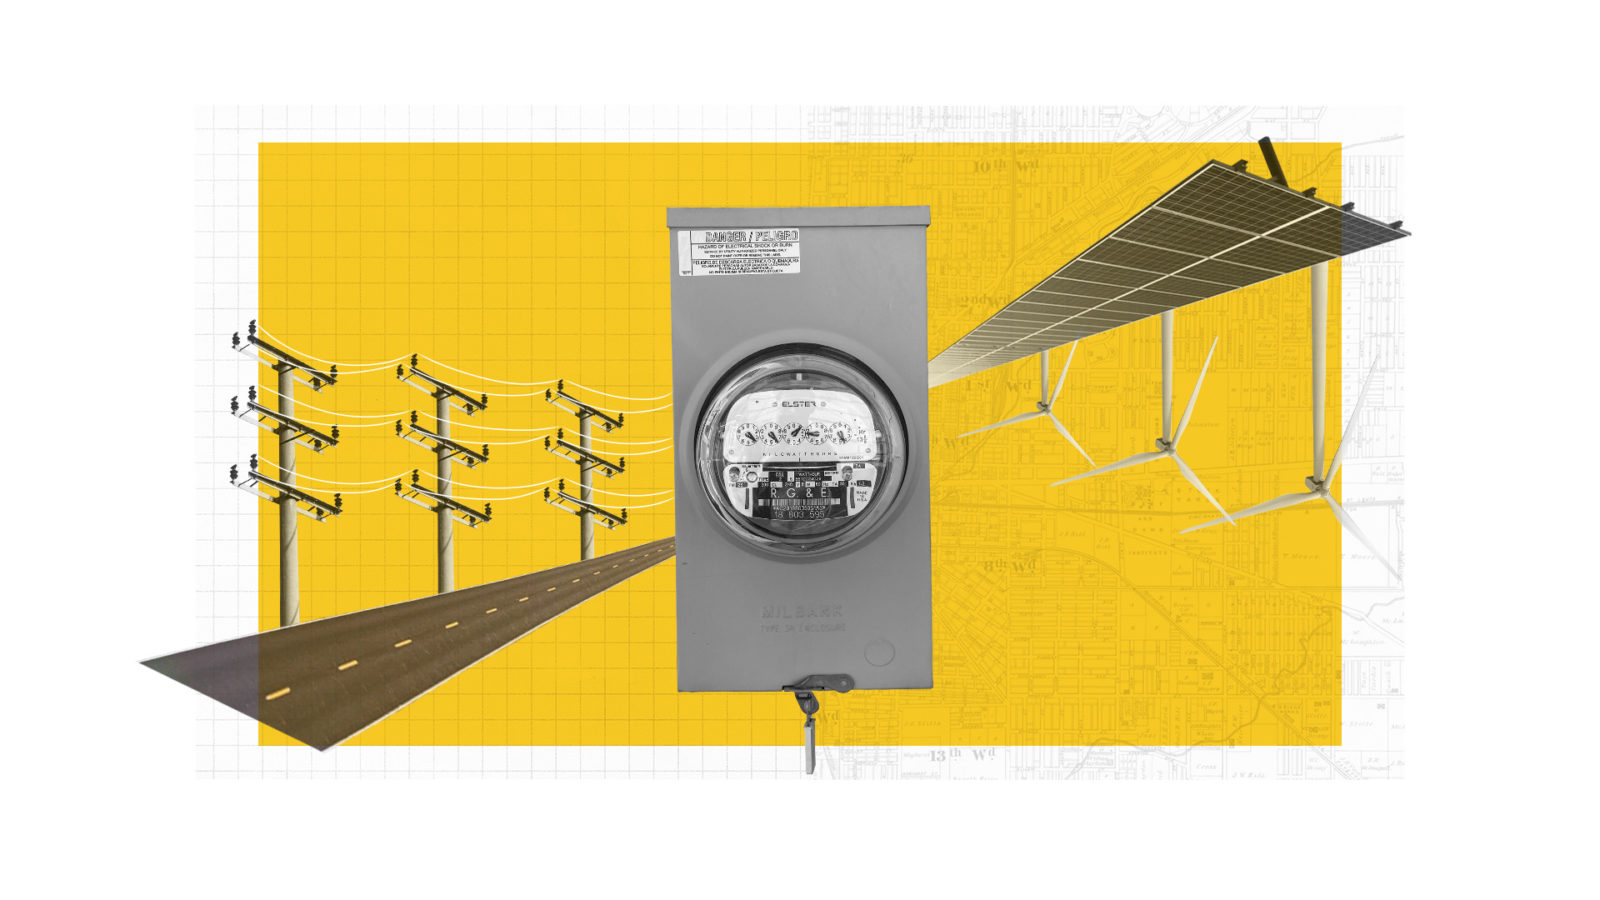 An electric meter with a road coming from the center on the left side and solar panels coming from the center on the right side to illustrate net metering